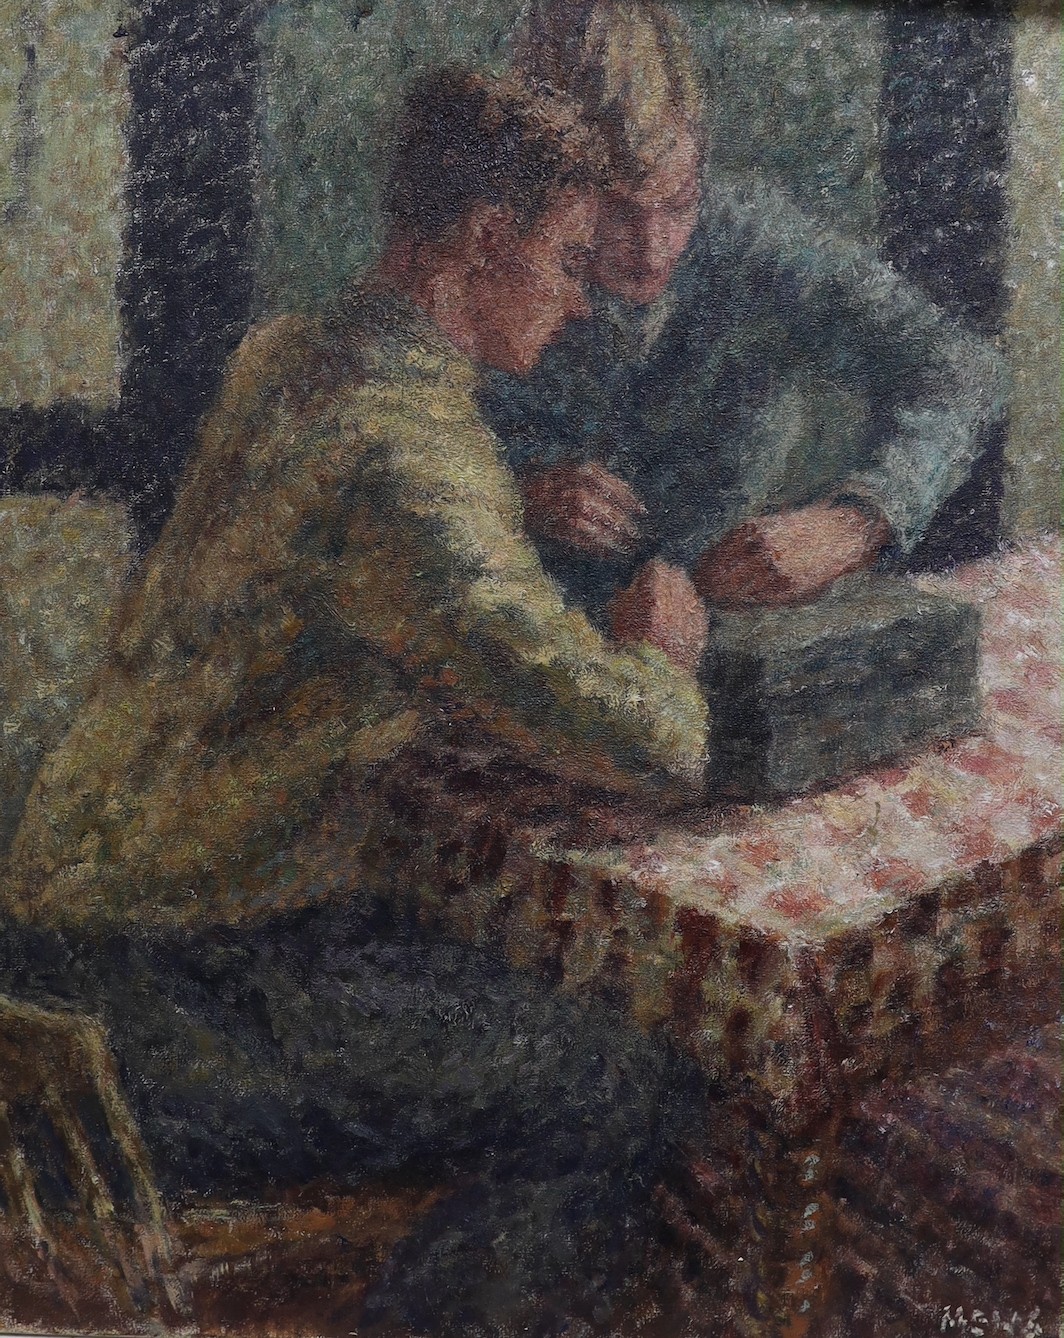 Modern British, oil on canvas, impressionist style, two boys seated at a table playing, signed Mews, unframed, 61 x 51cm